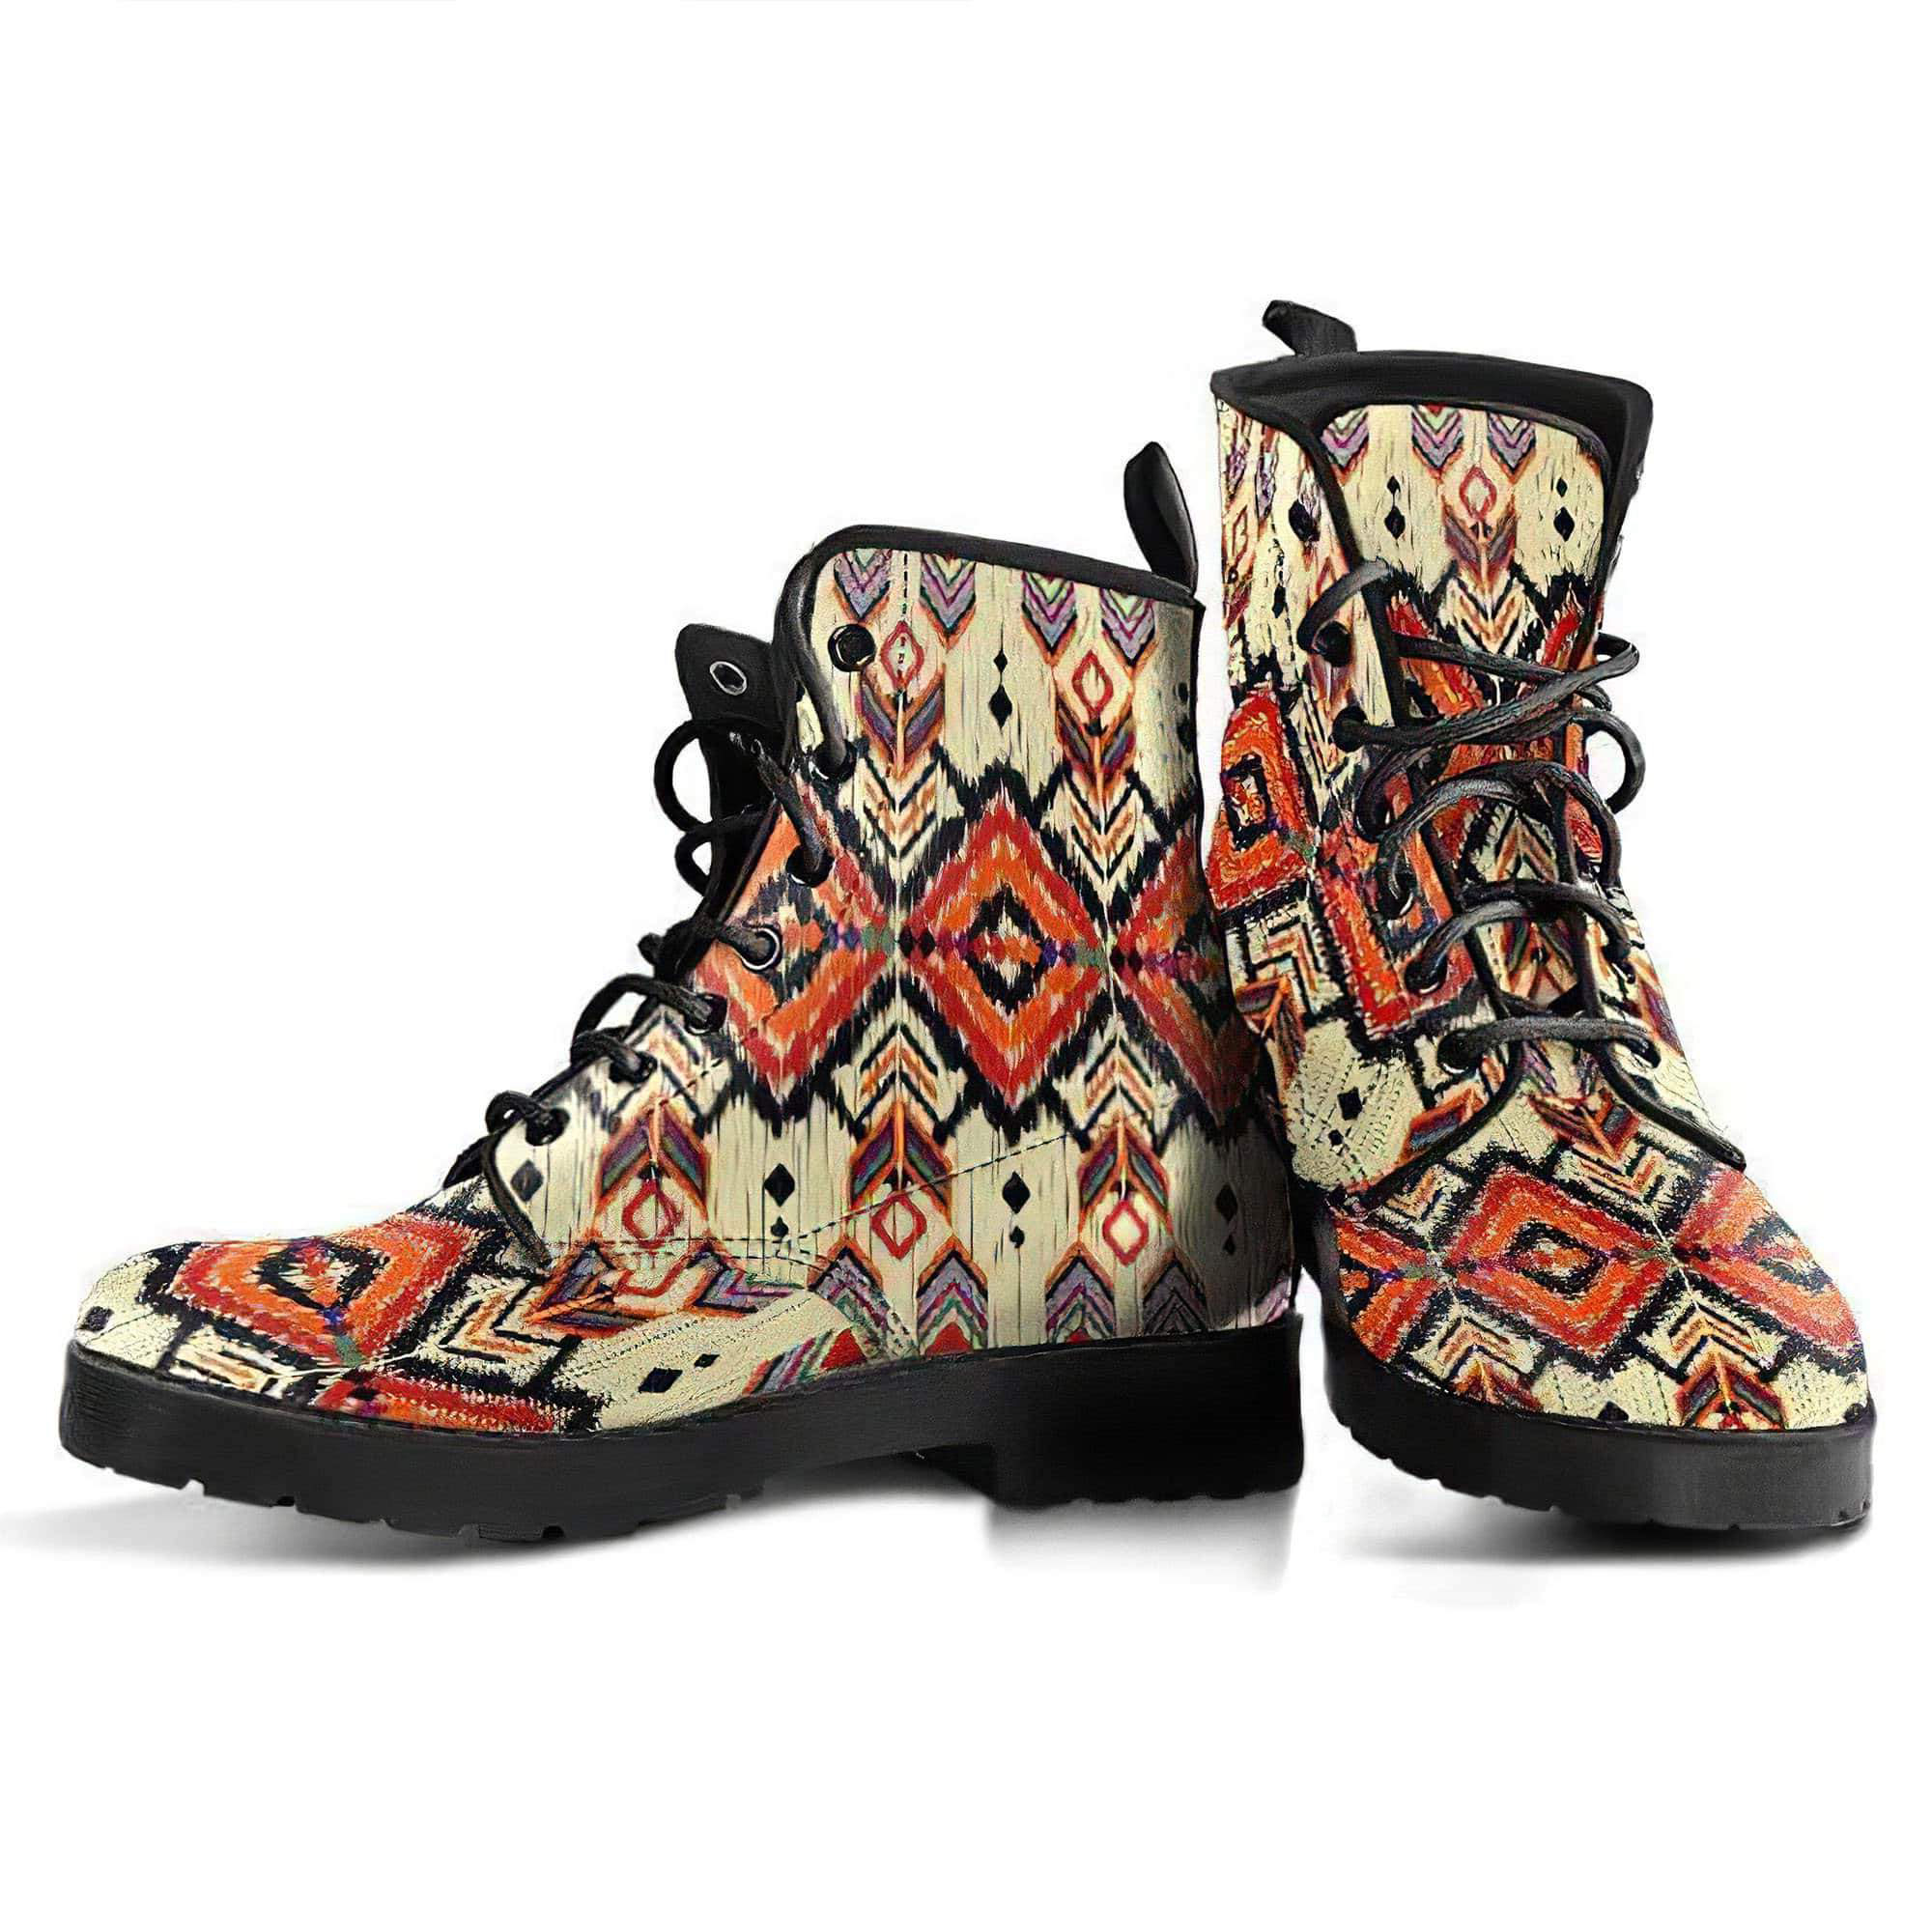 native-pattern-handcrafted-boots-women-s-leather-boots-12051914326077.jpg